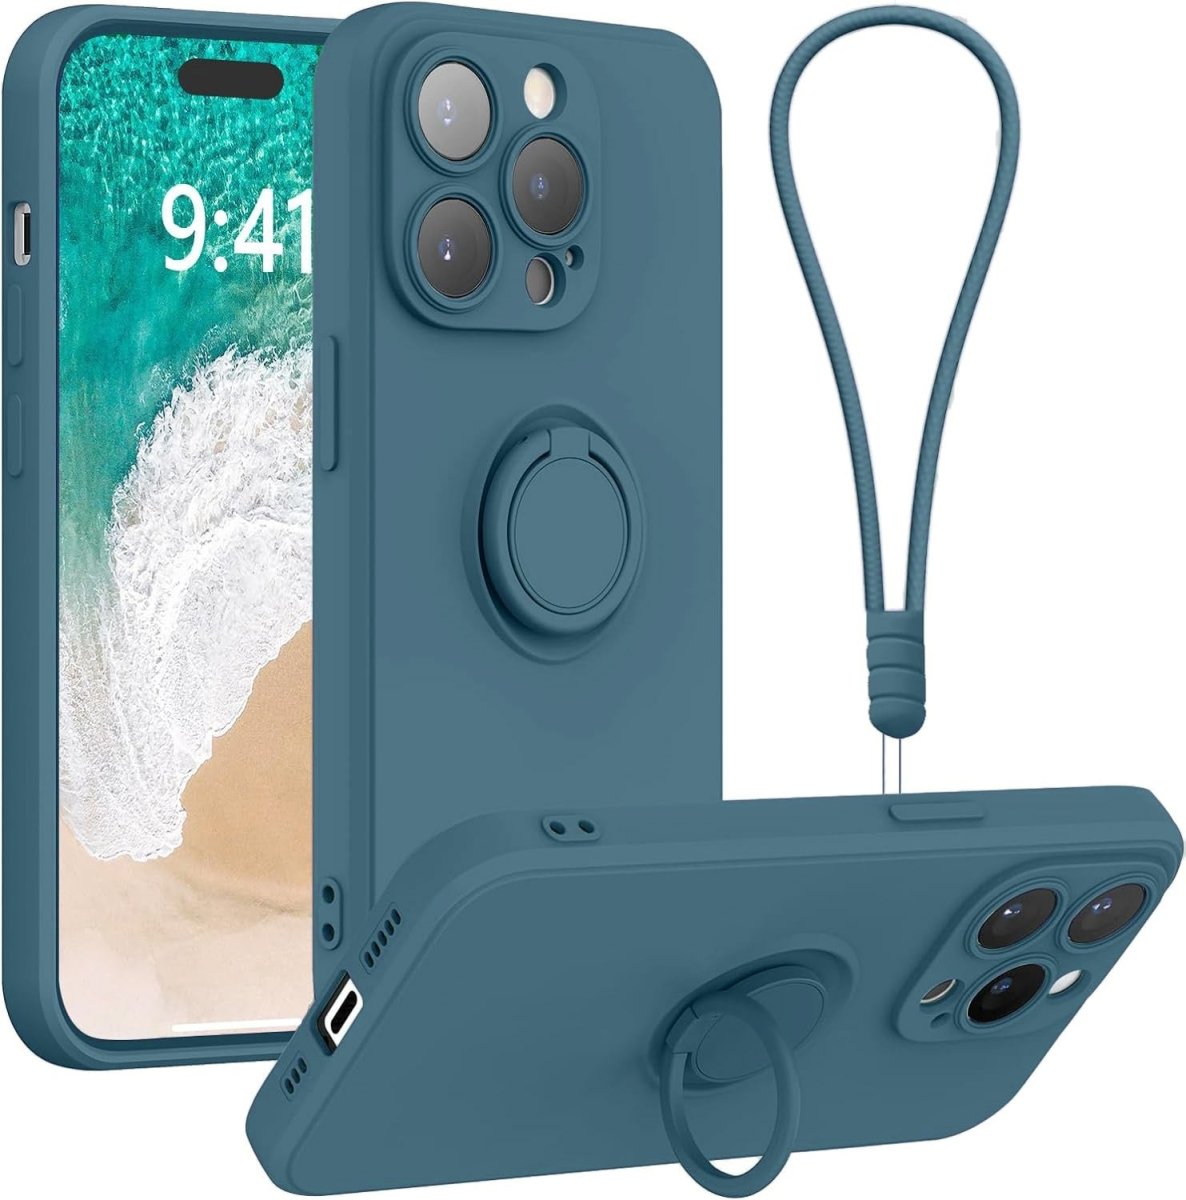 Navy Blue Shockproof Silicone Case For iPhone With Ring And Lanyard  Navy Blue iPhone 11 Accessories Gifts UK